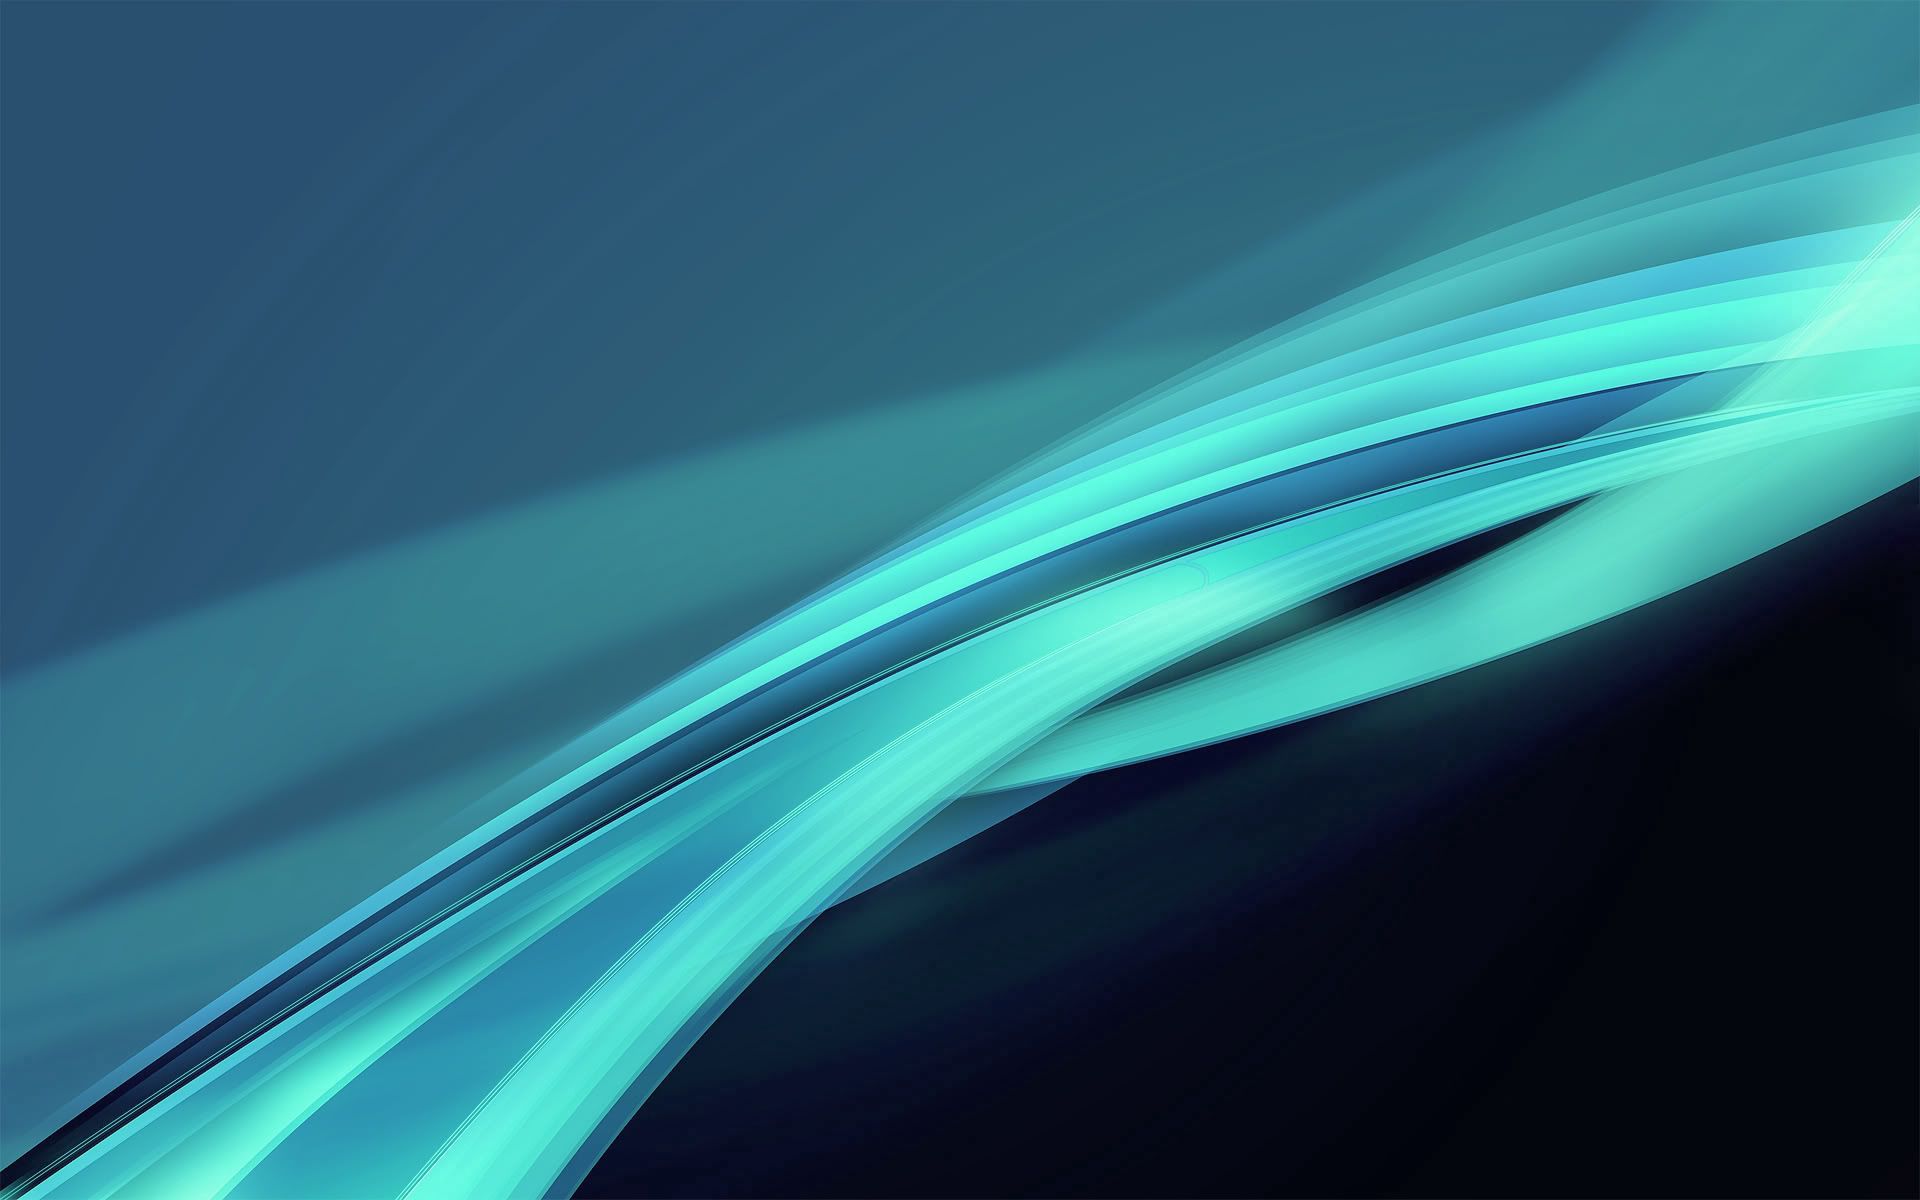 Cool Wallpapers lines, abstract, shining, blue, shine, light, bright